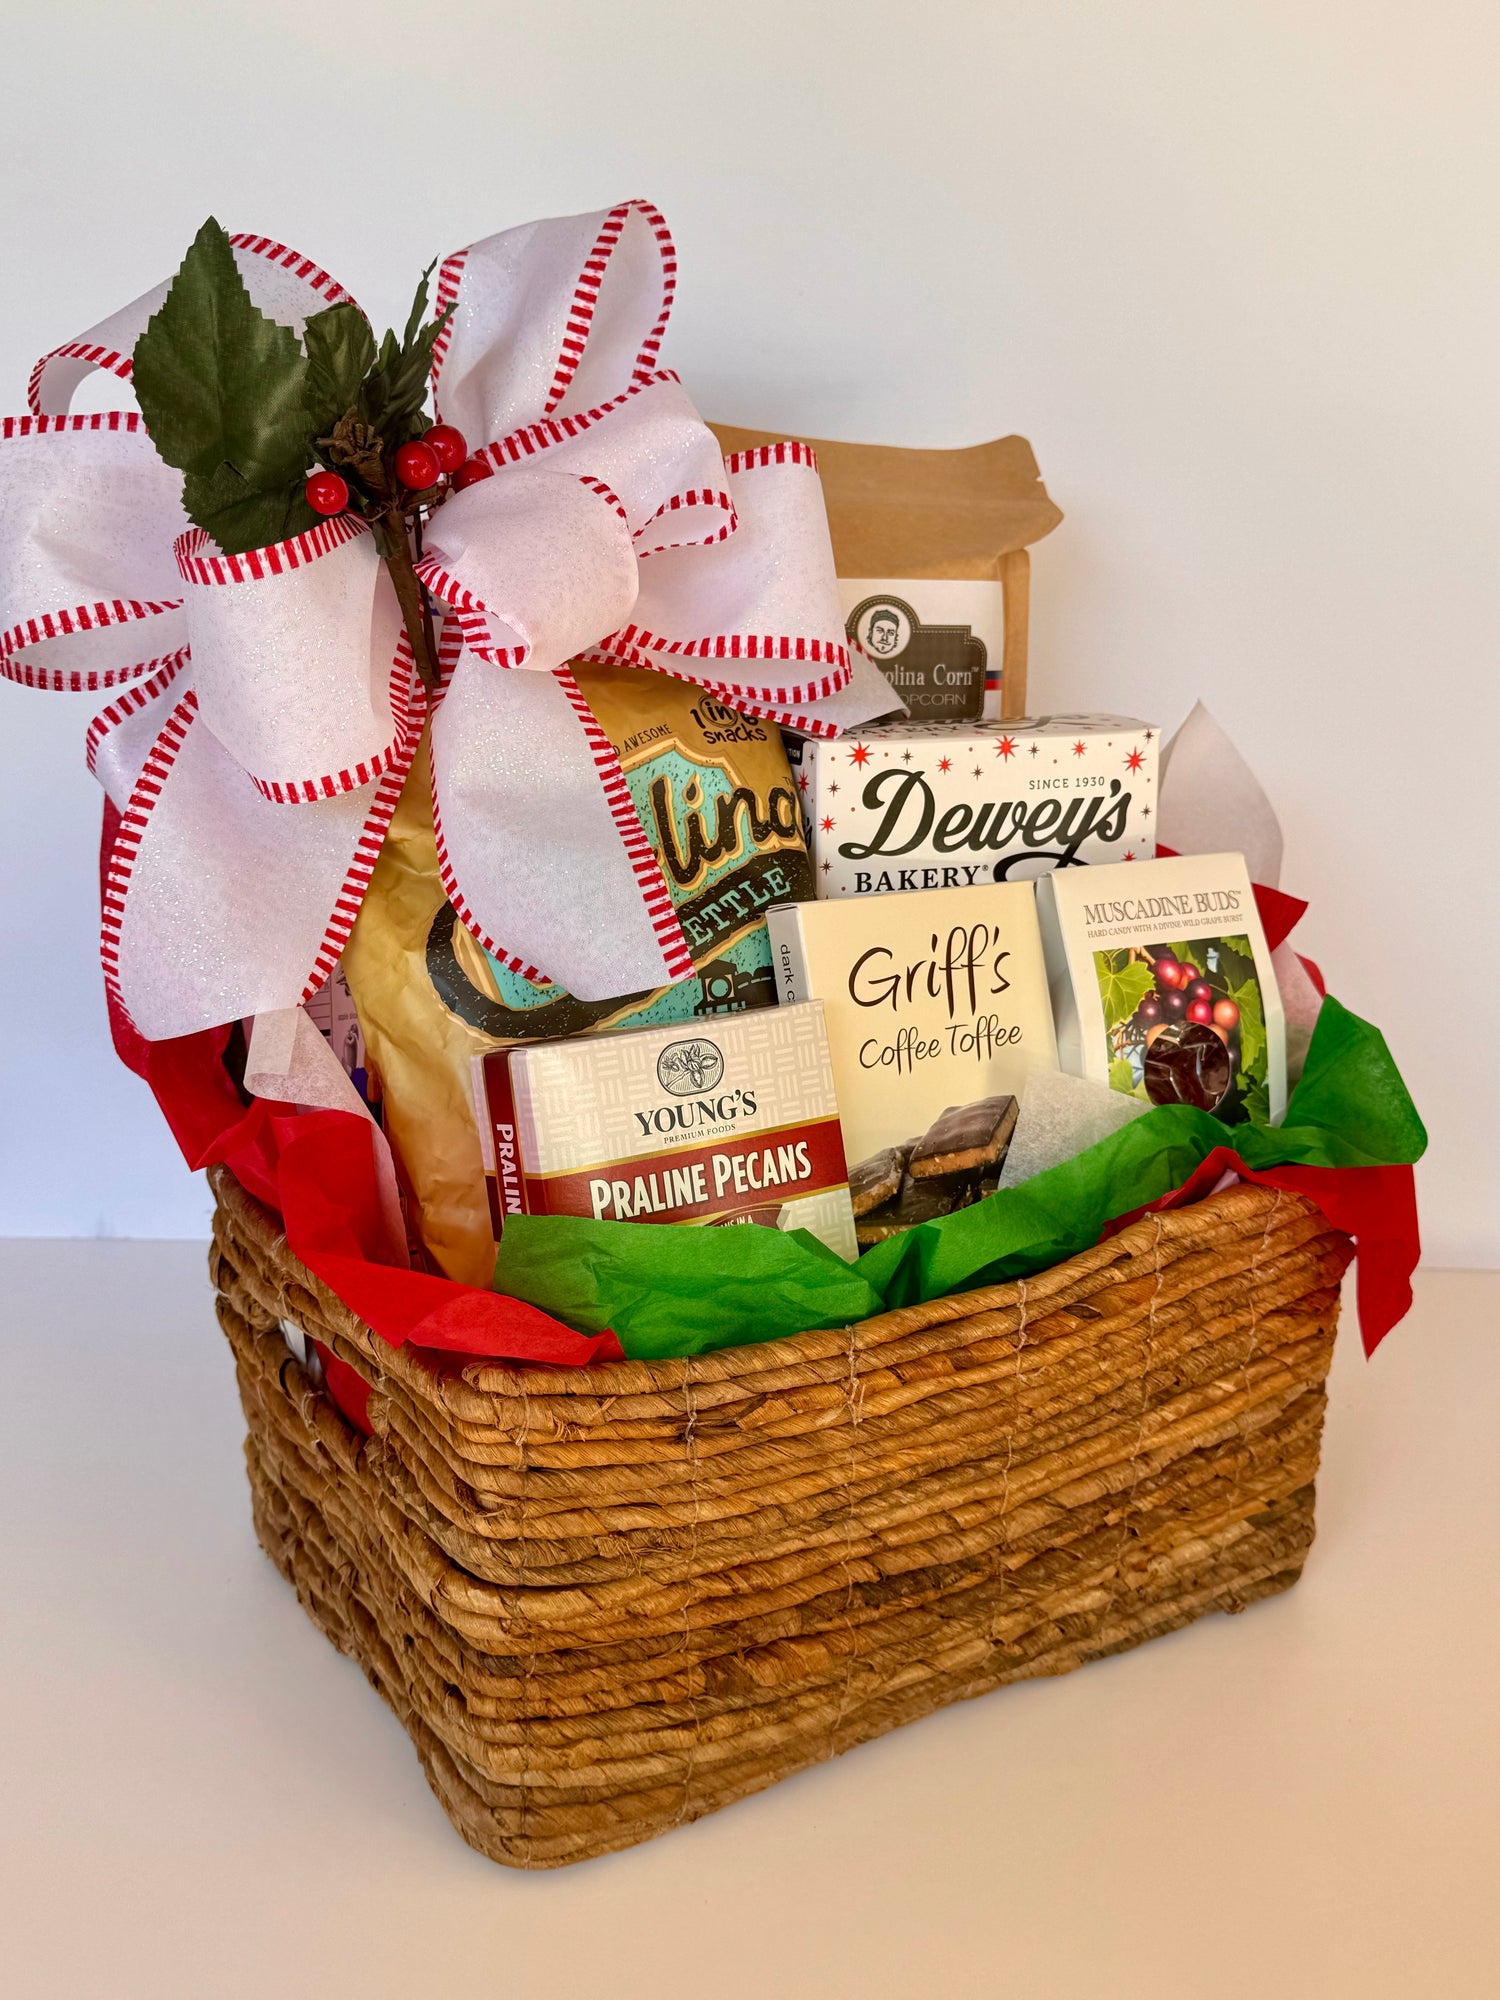 Make Cinco de Mayo Memorable with These Creative Gift Basket Ideas! |  SwagGrabber